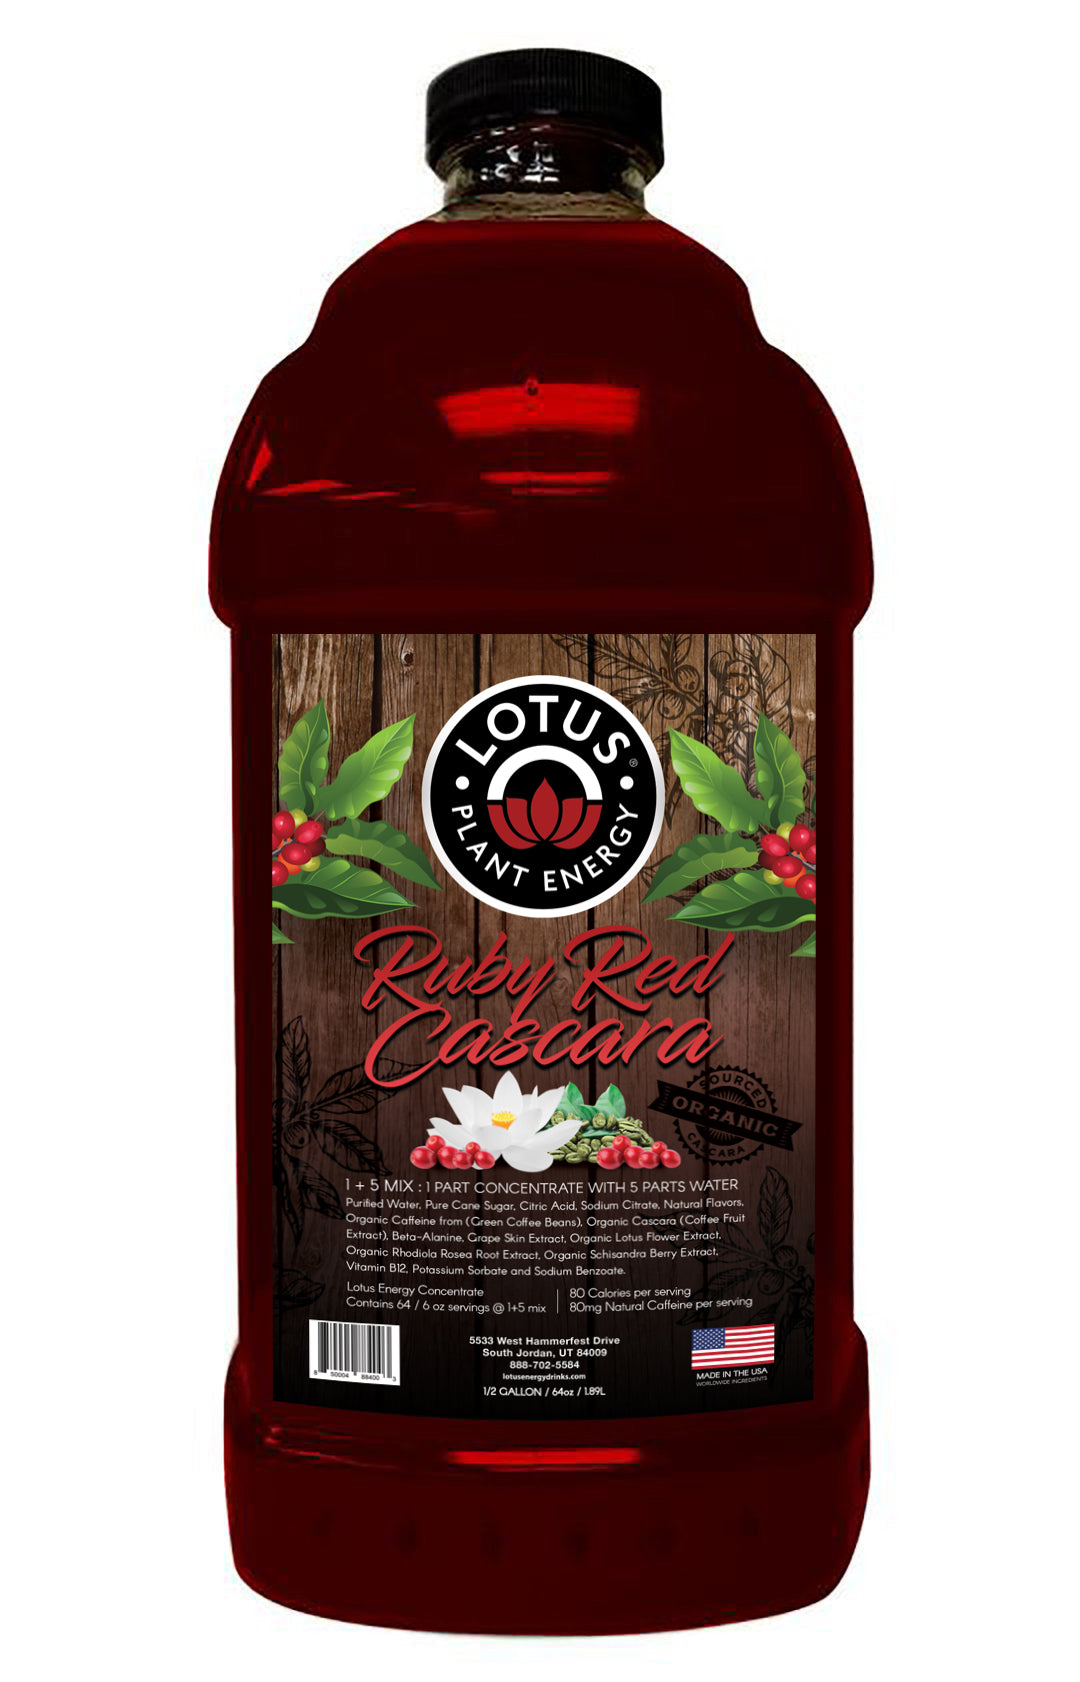 Ruby Red Lotus Cascara Energy Concentrate